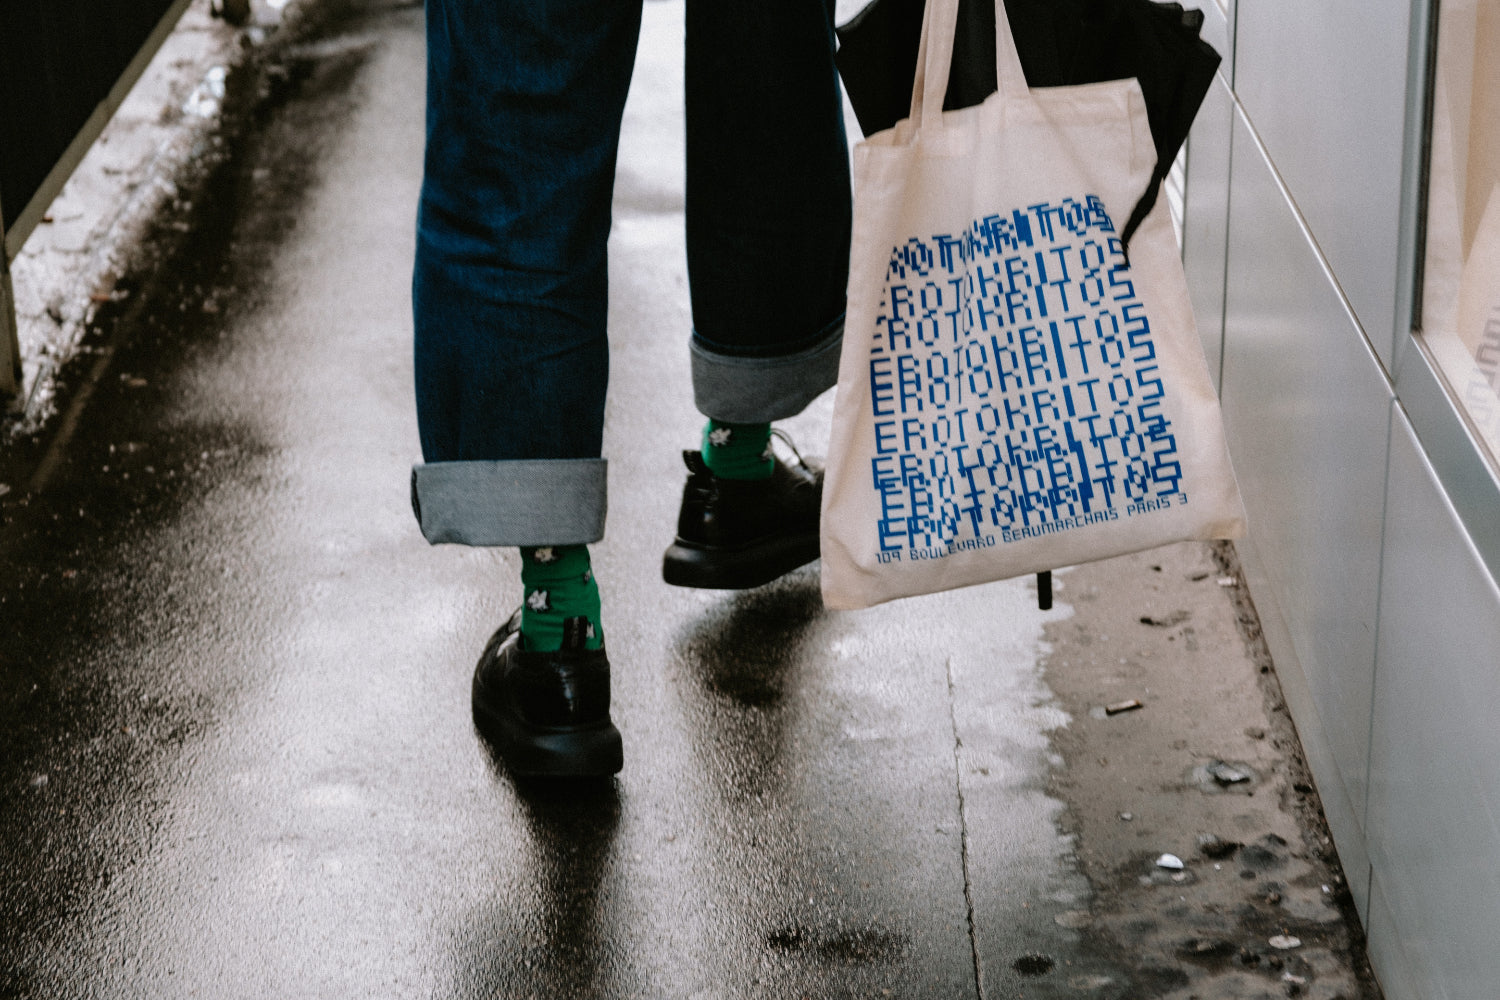 A person walks away carrying a printed tote bag, a product that can be to make money online